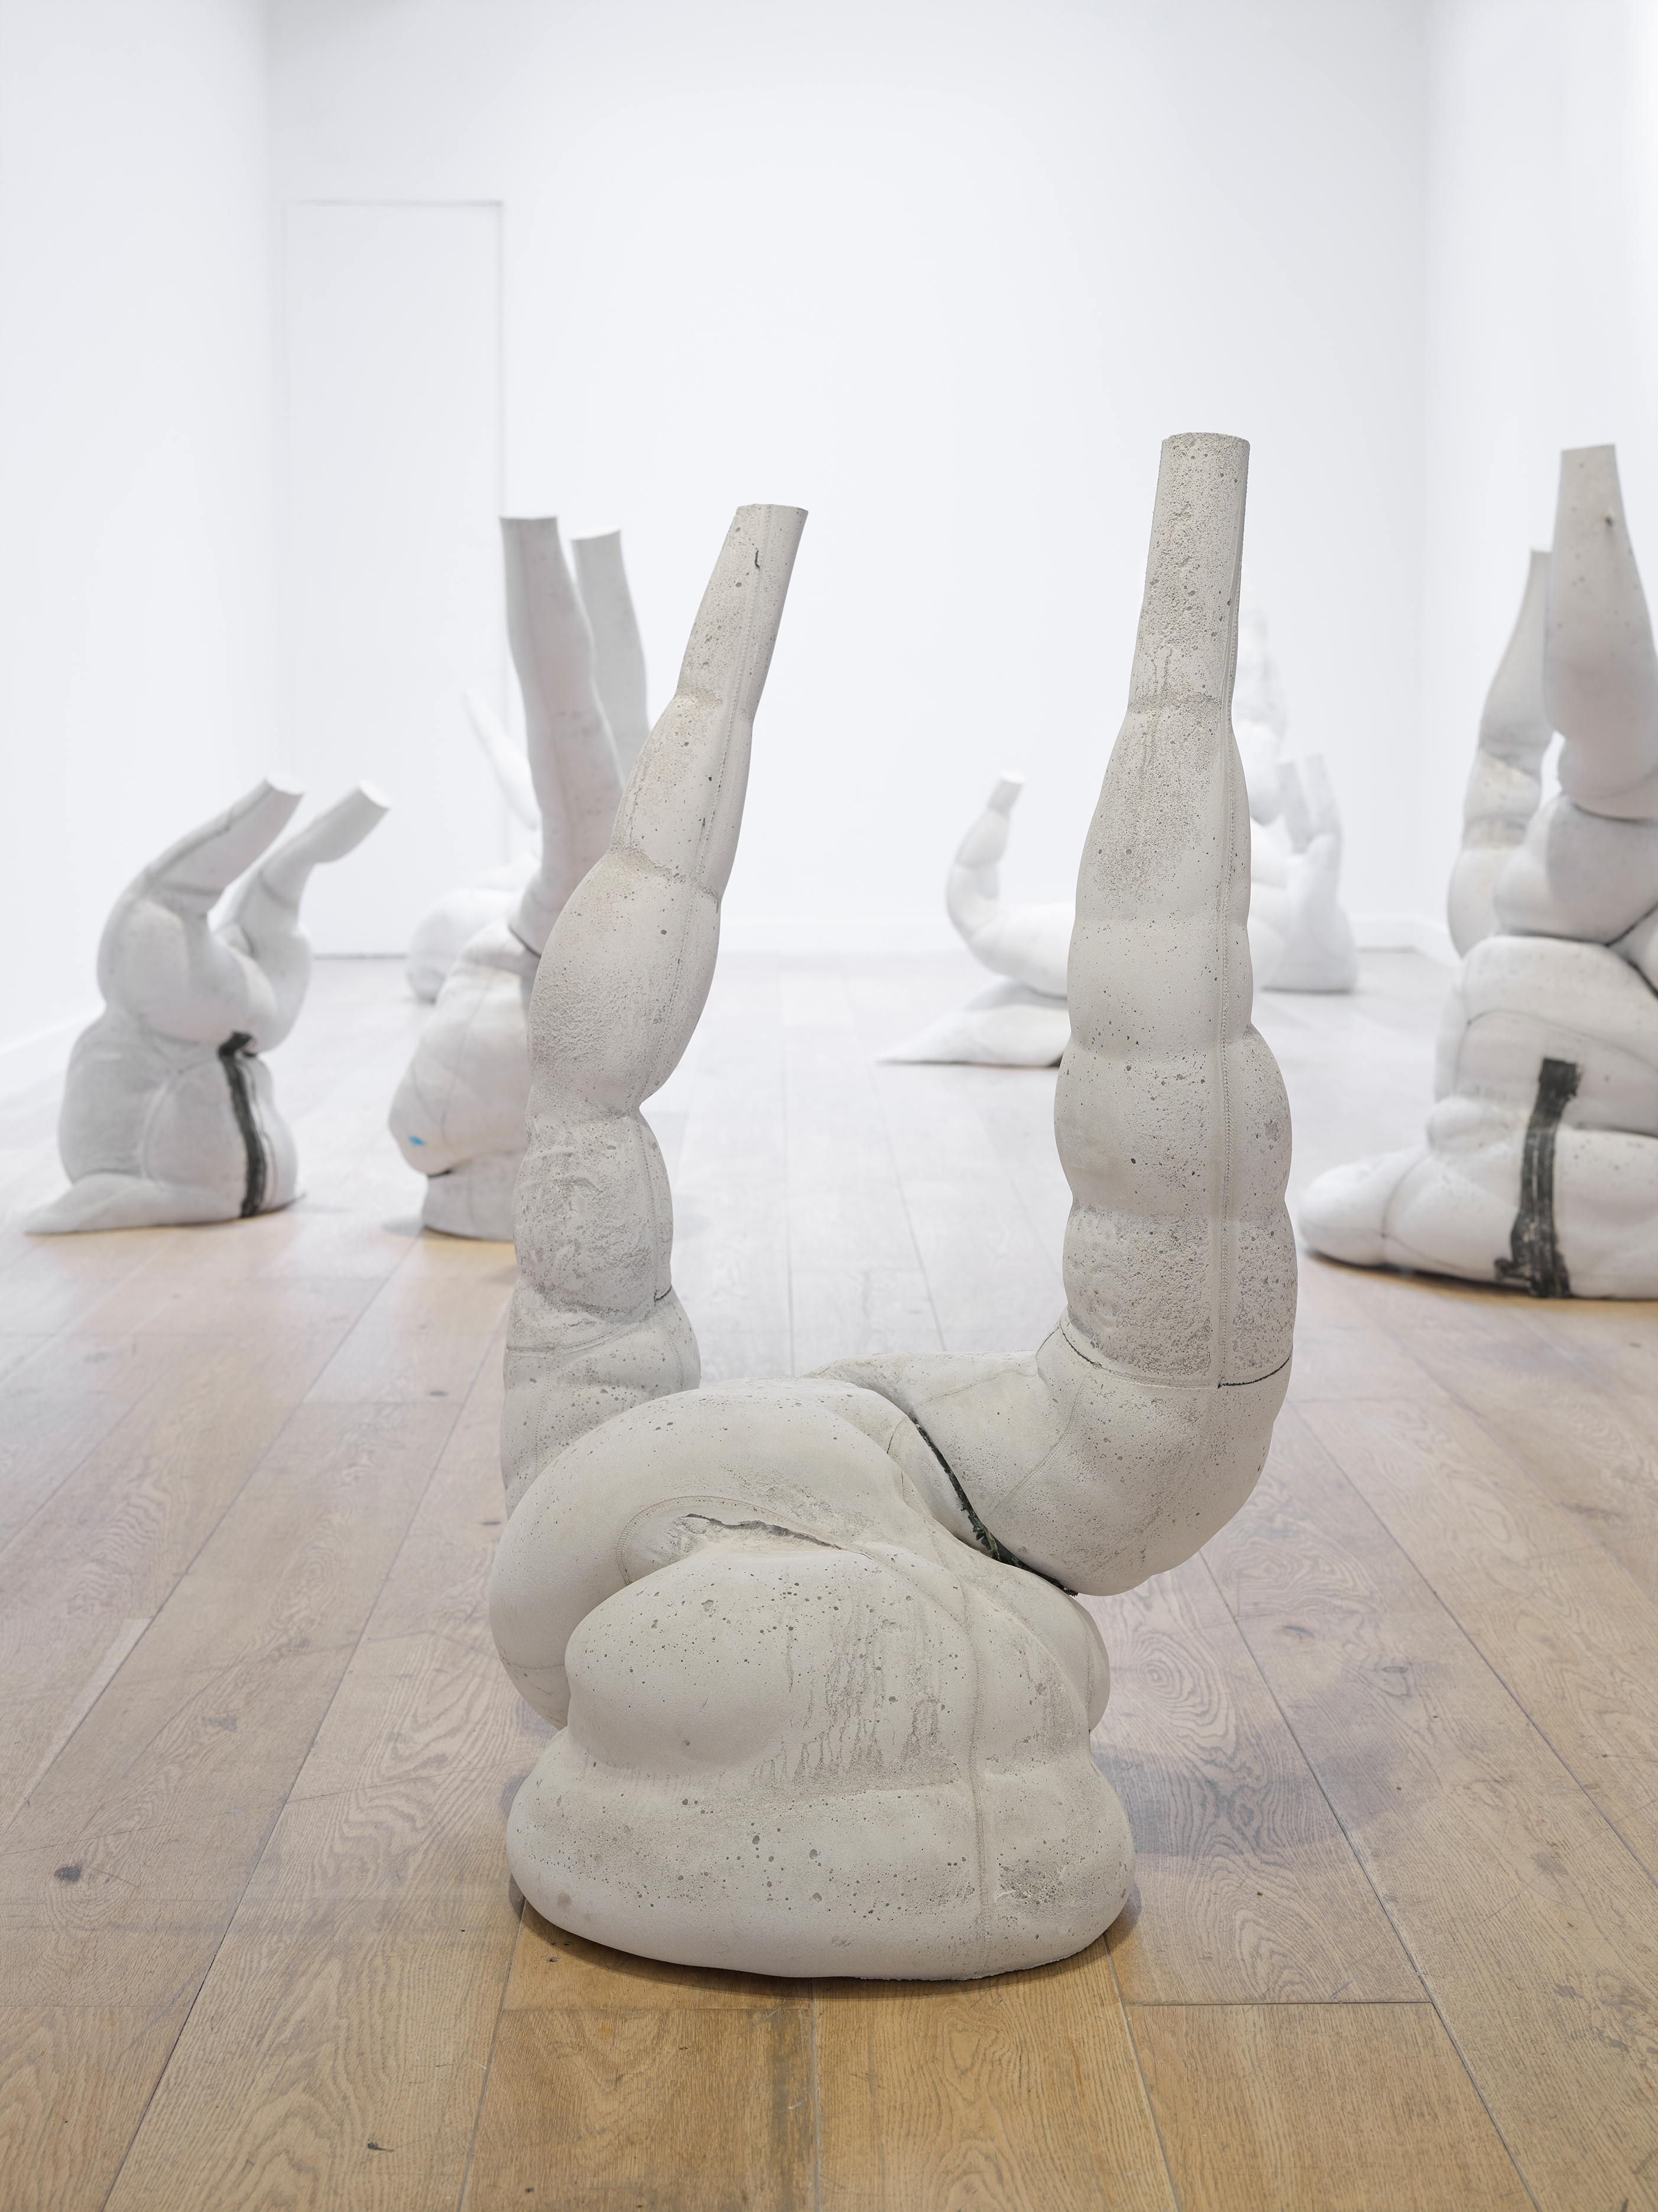 Installation view of Tania Kovats: Oceanic at Parafin, London. Courtesy Parafin, London. Photo: Peter Mallet.